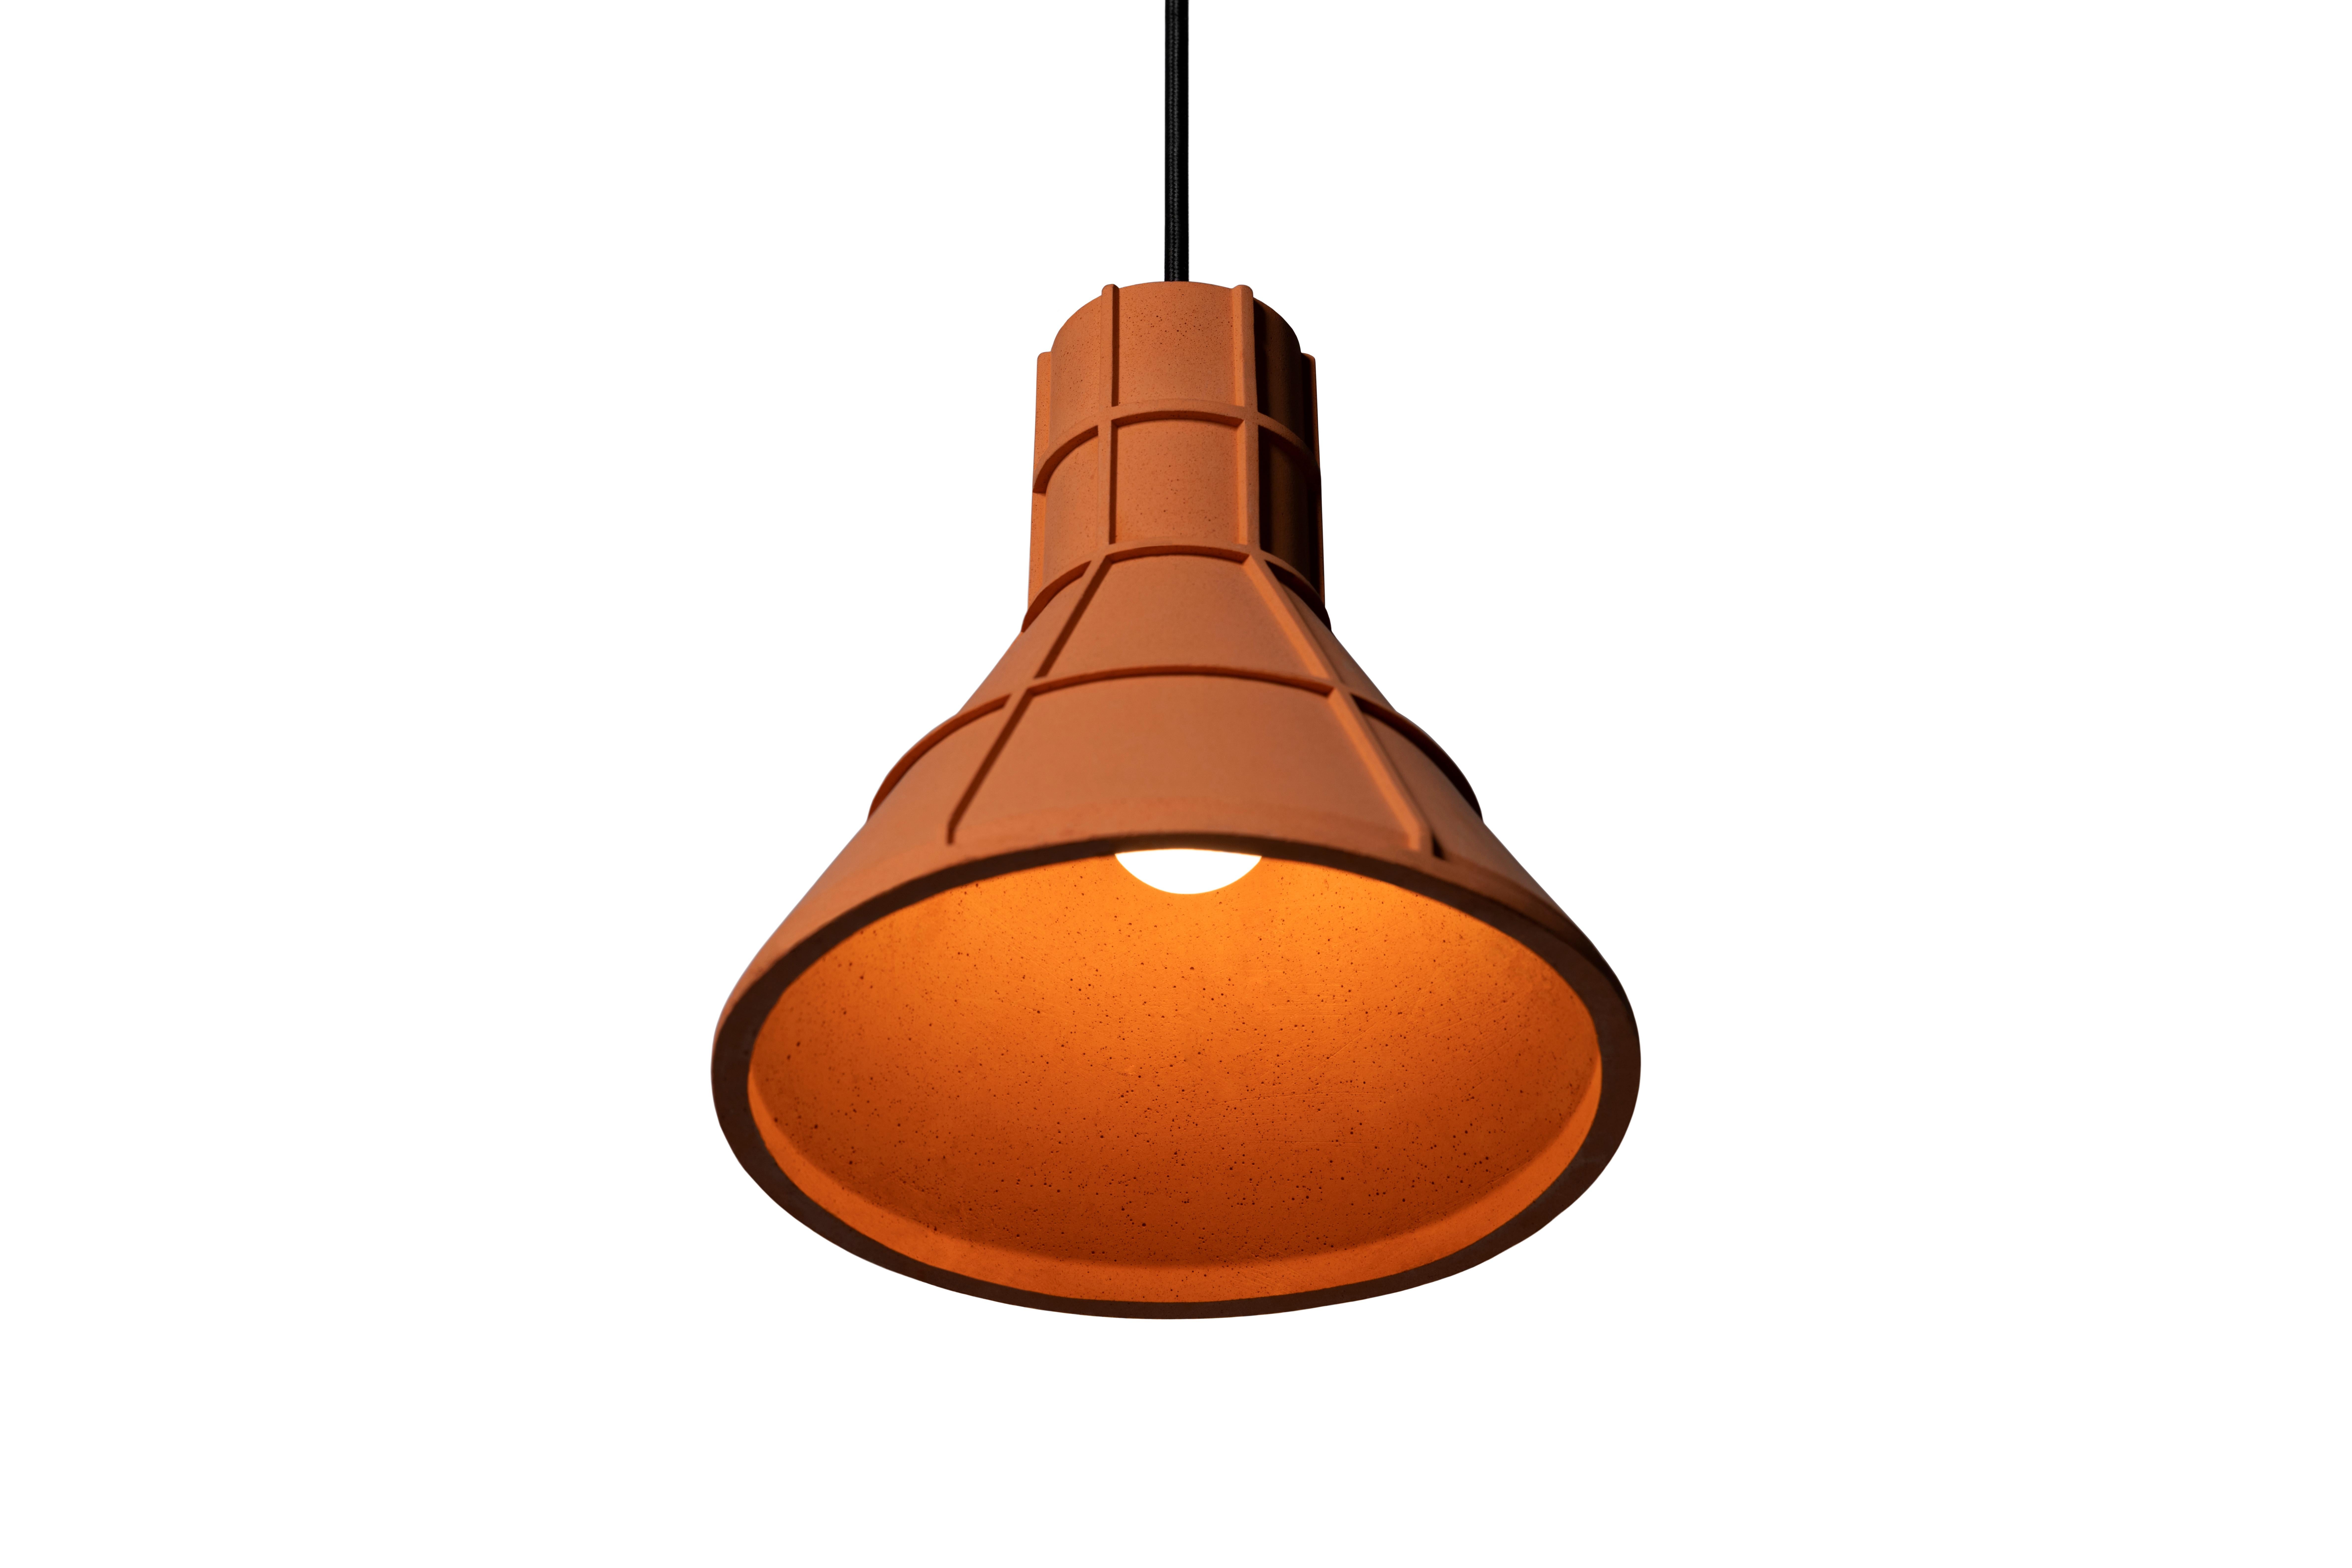 Pendant lamp 'U' by Nongzao x Bentu design.
Material: Terracotta 
Color: earthy orange

Measures: 21.1 cm high, 22.2 cm diameter
Wire: 3 meters (black)
Lamp type: AC 100-240V 50-60Hz  9W - Comptable with US electric system.

Variations:
- Color: